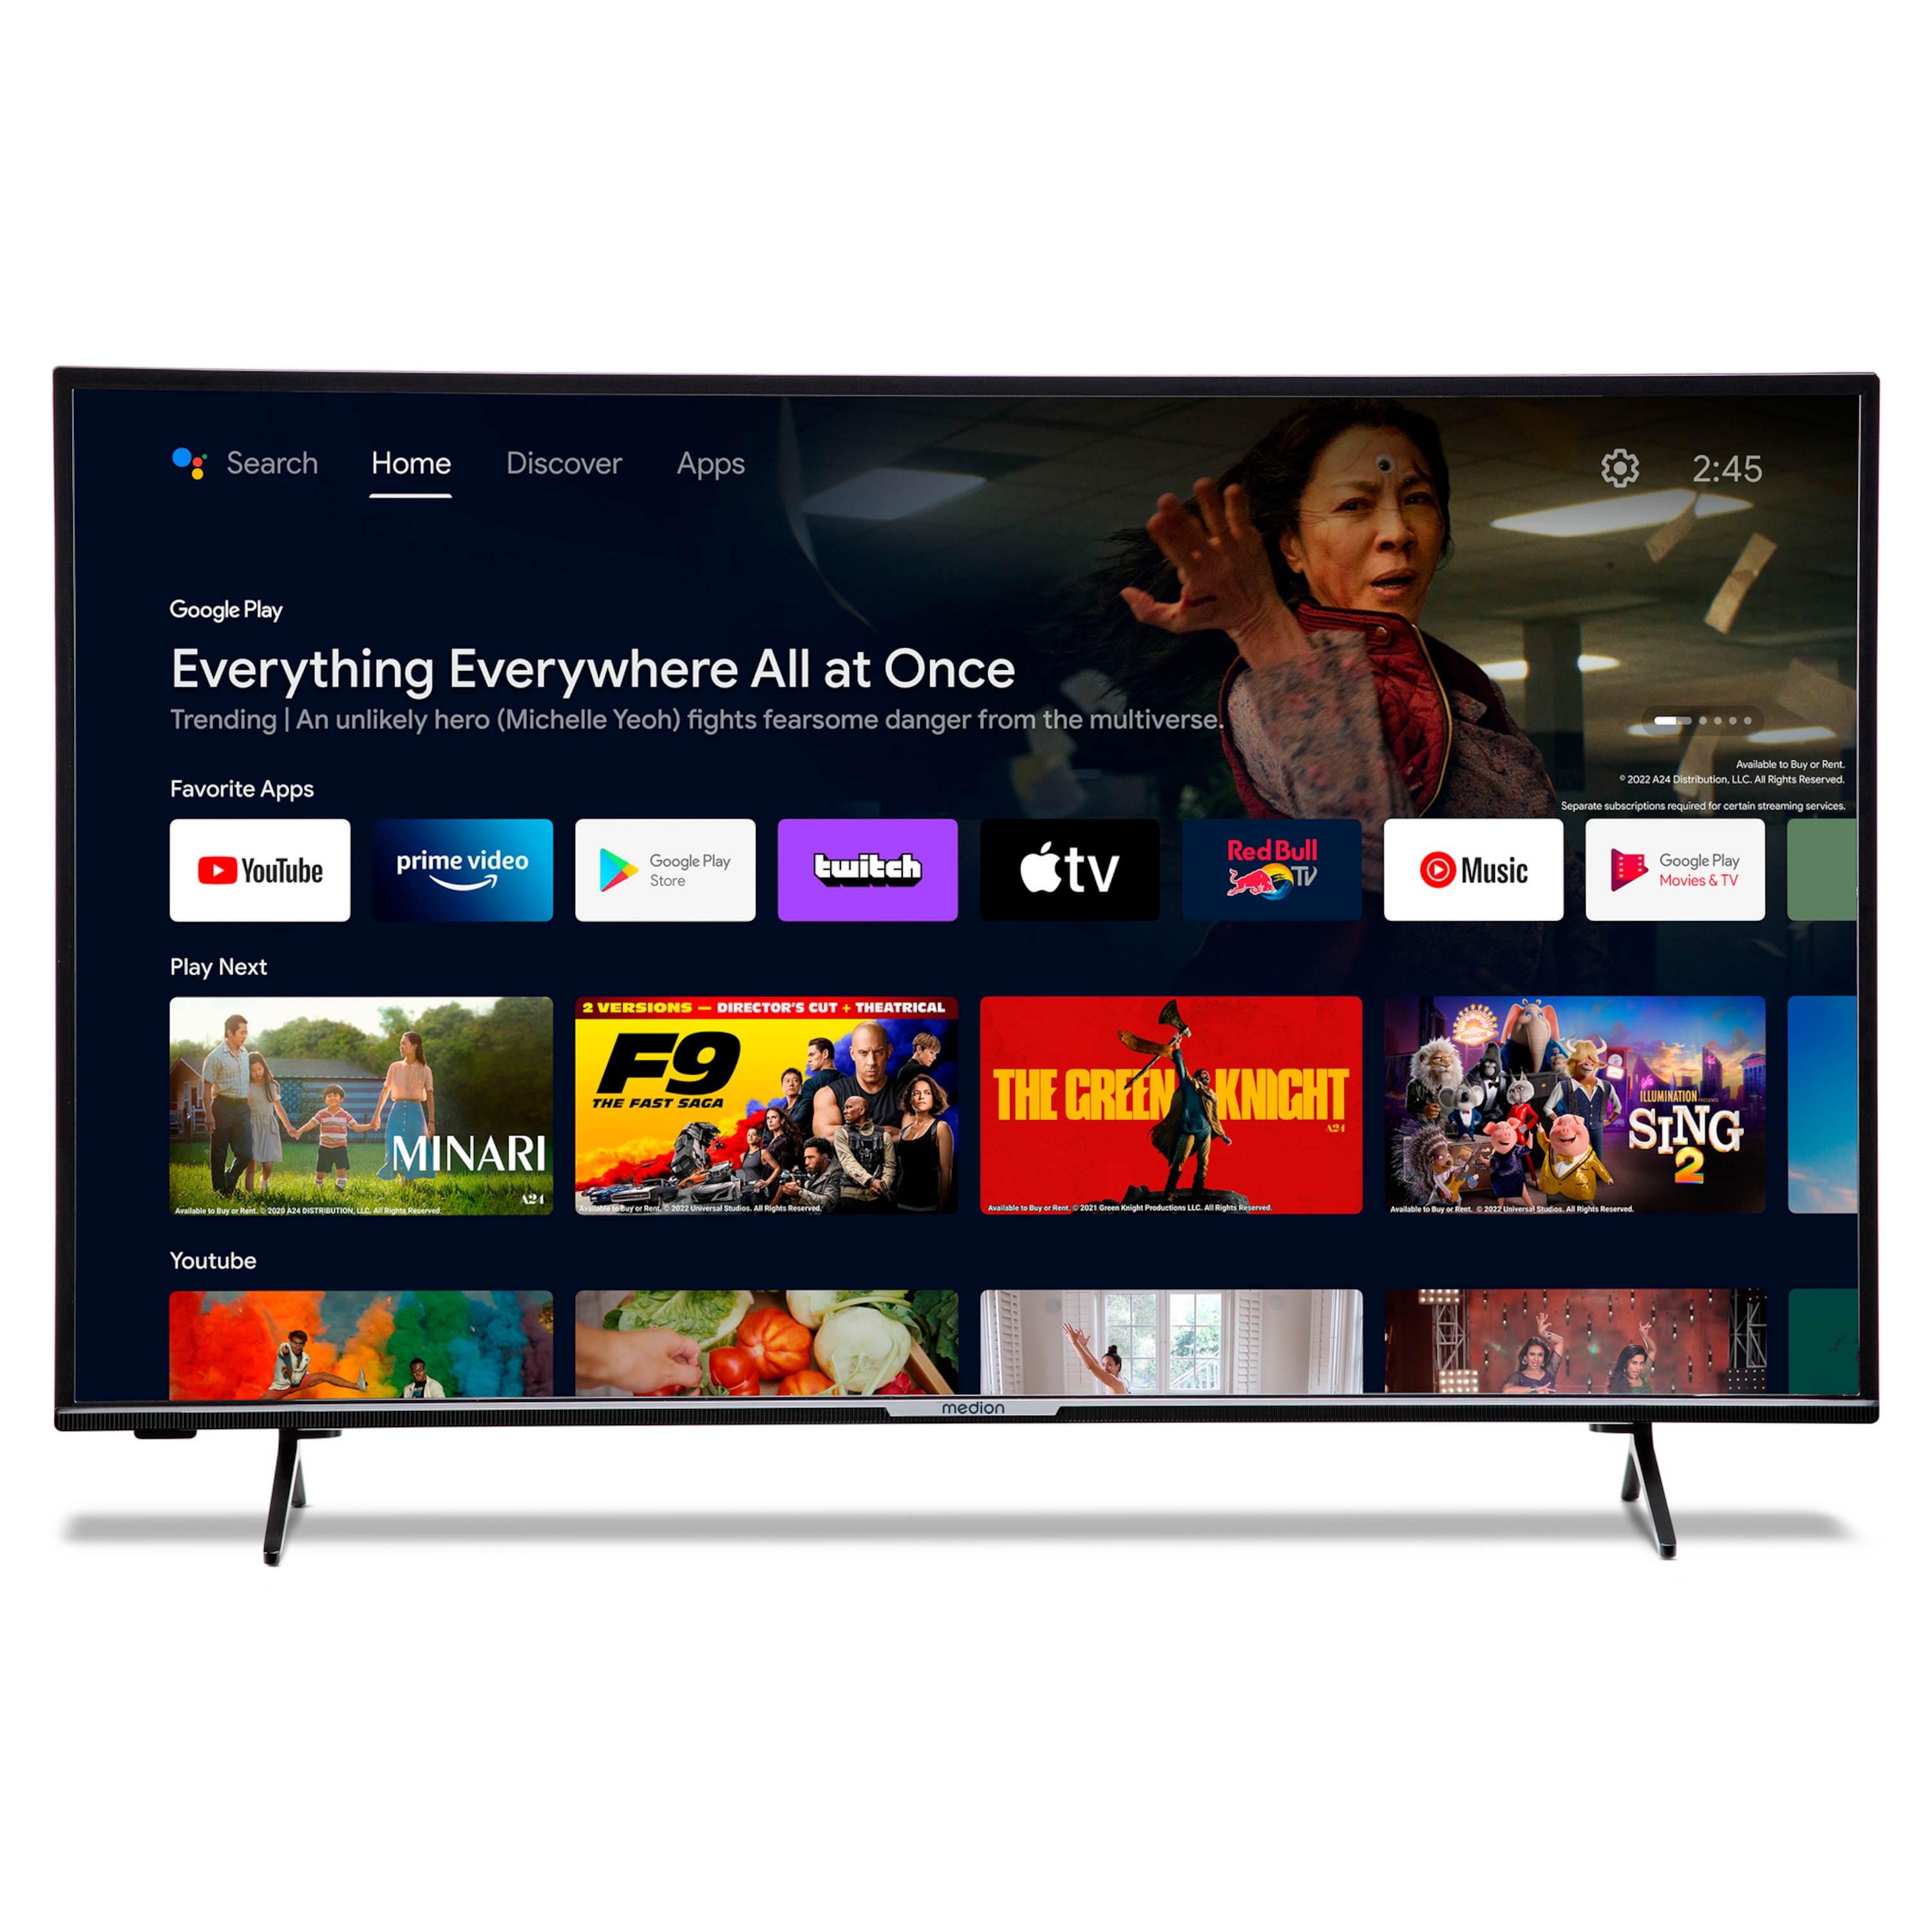 MEDION® LIFE® P14371 (MD 30044) Android TV™, 108 cm (43''), Full HD Display, PVR ready, Bluetooth®, Netflix, Amazon Prime Video